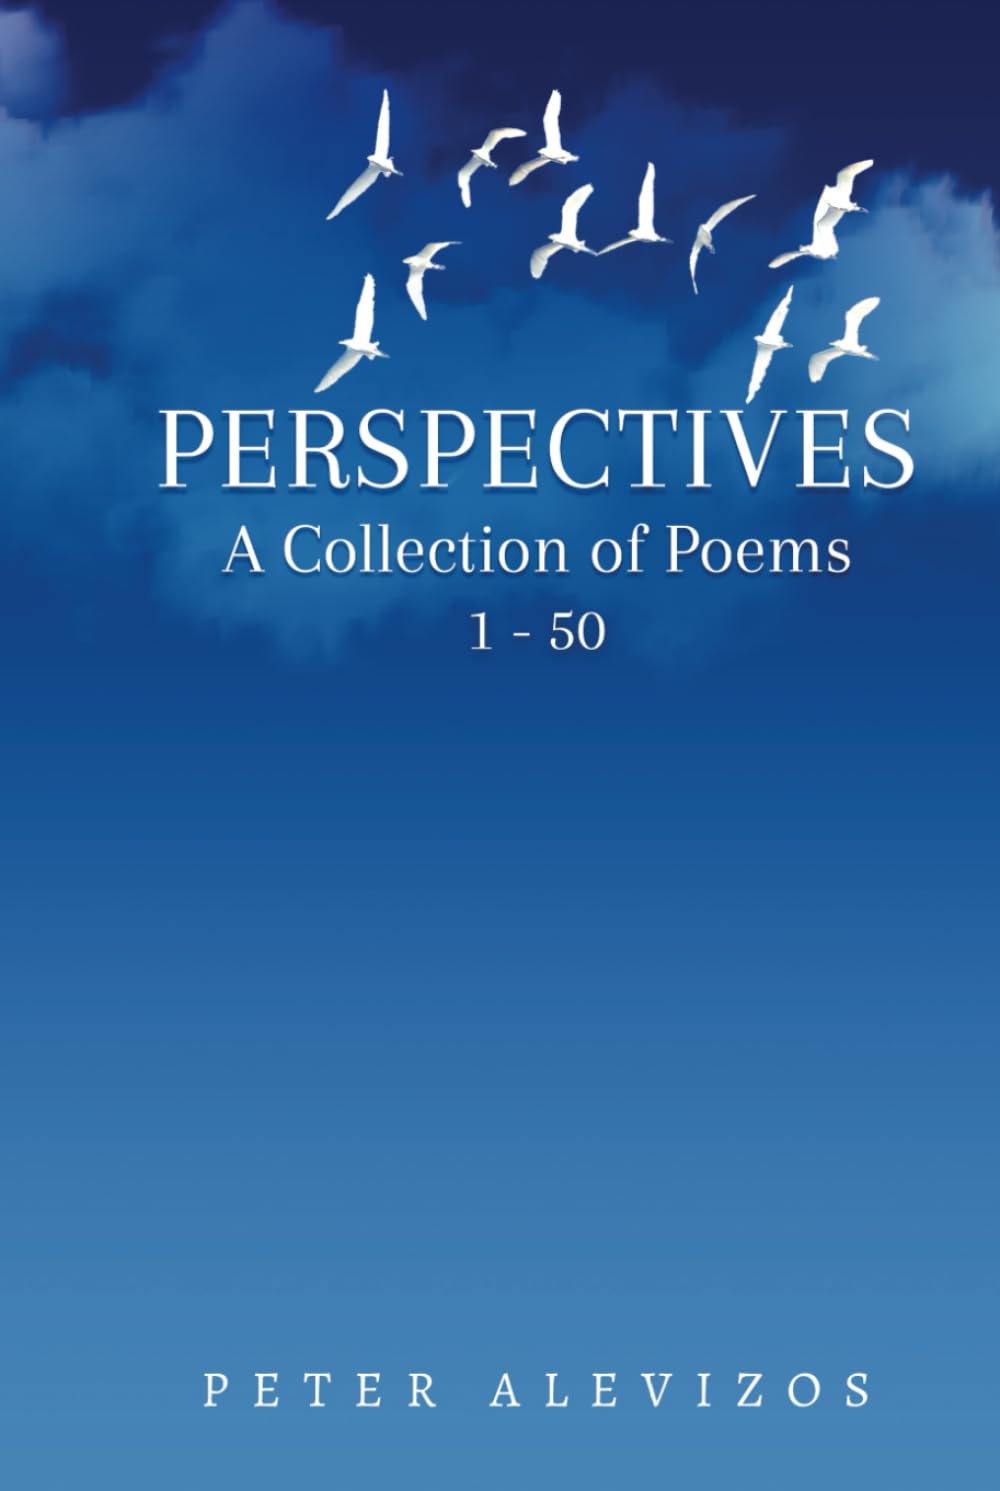 New Poetry Collection, 'Perspectives,' by Peter Alevizos, Offers Insightful Discourse on Society and the Human Condition